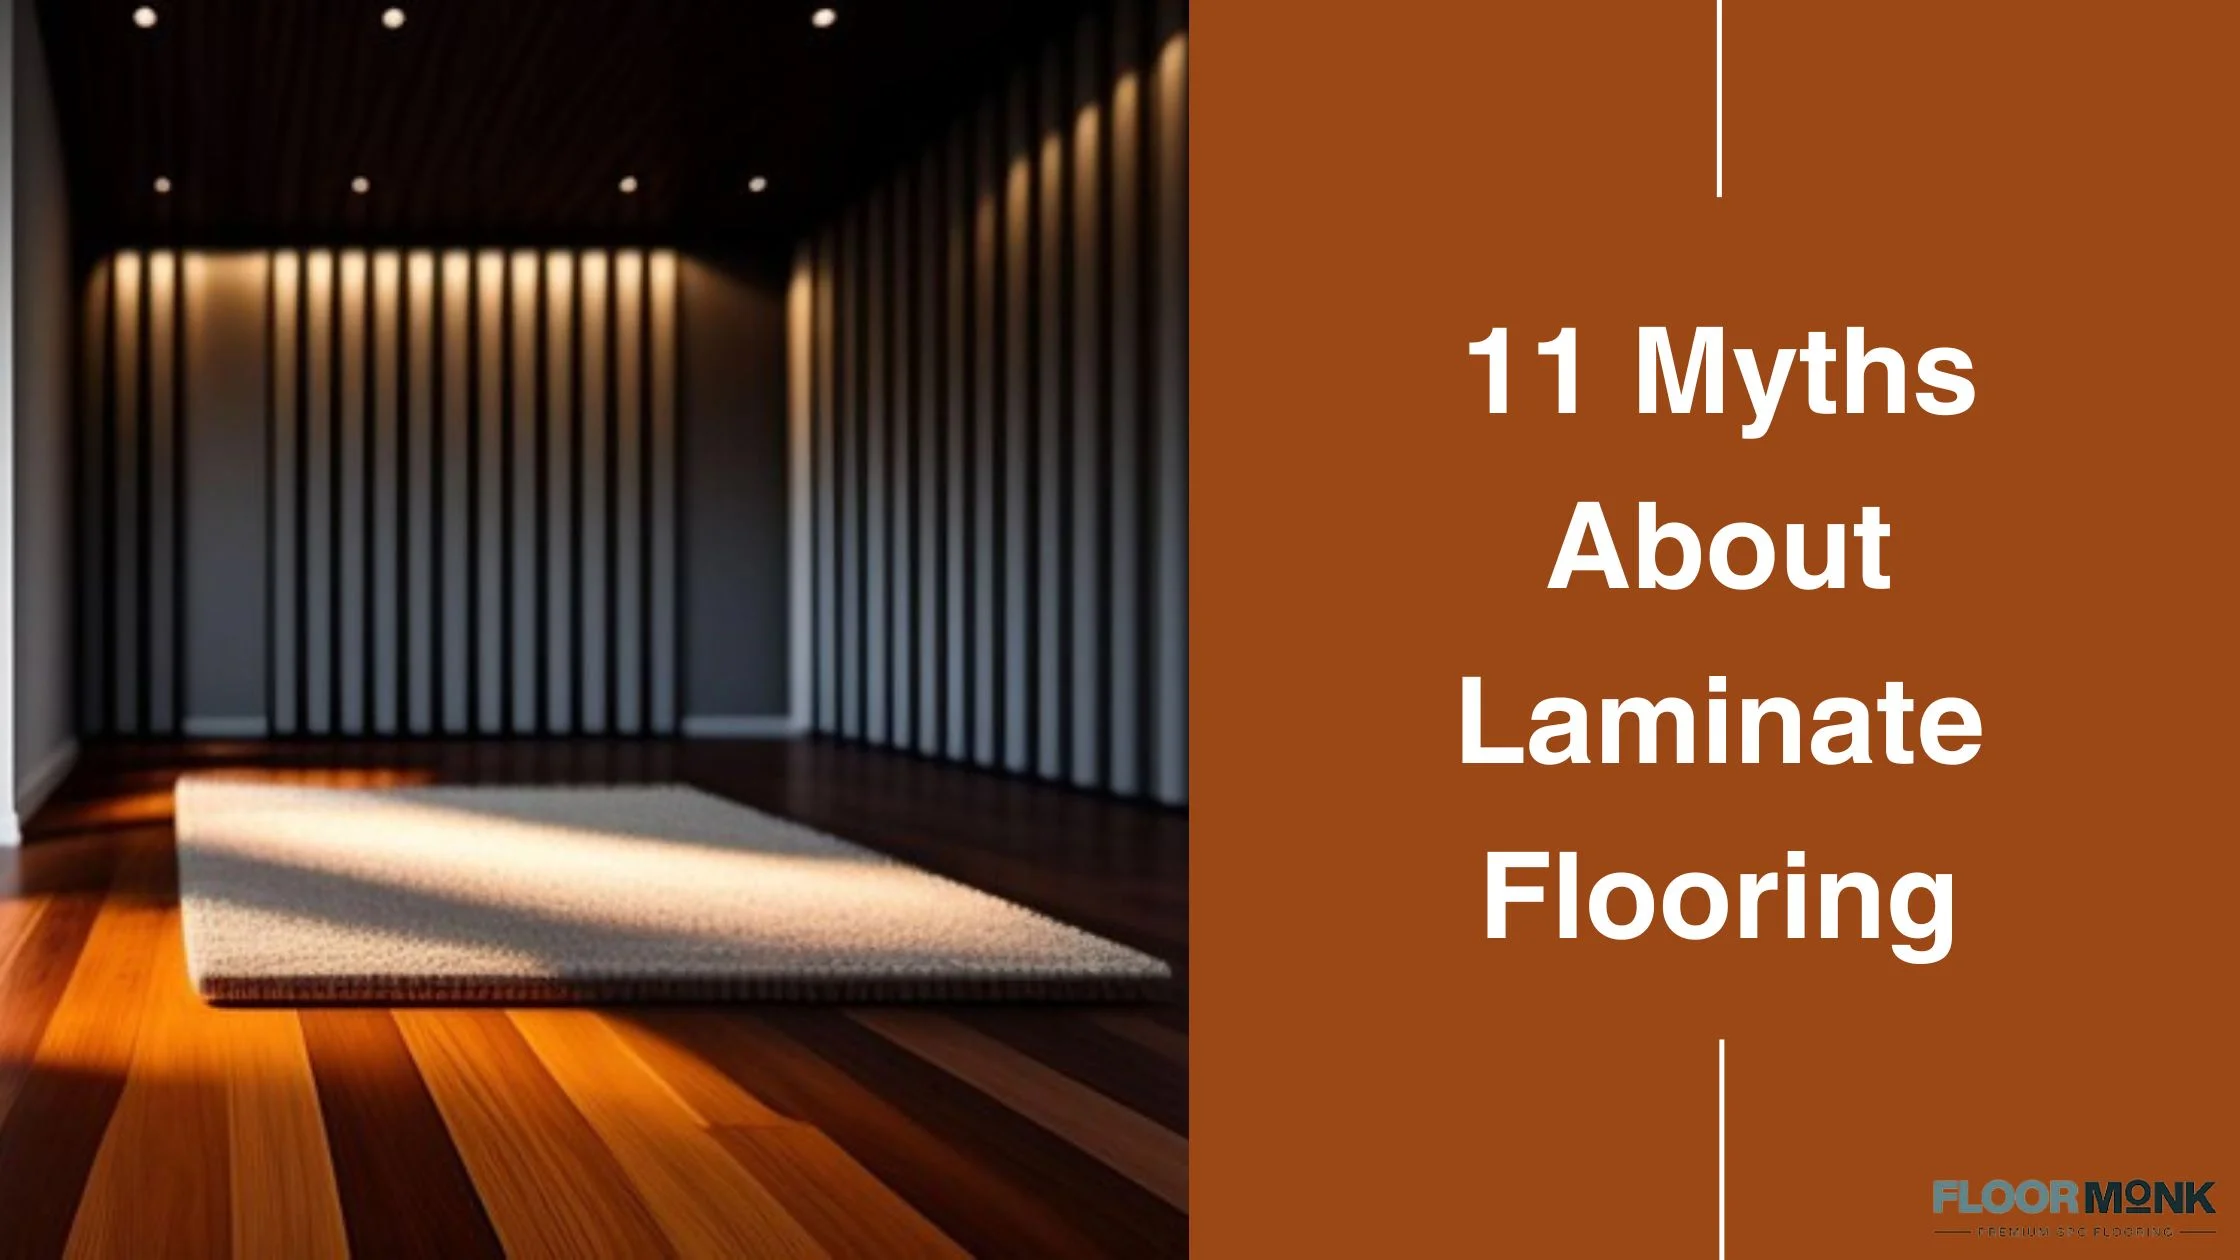 11 Myths About Laminate Flooring